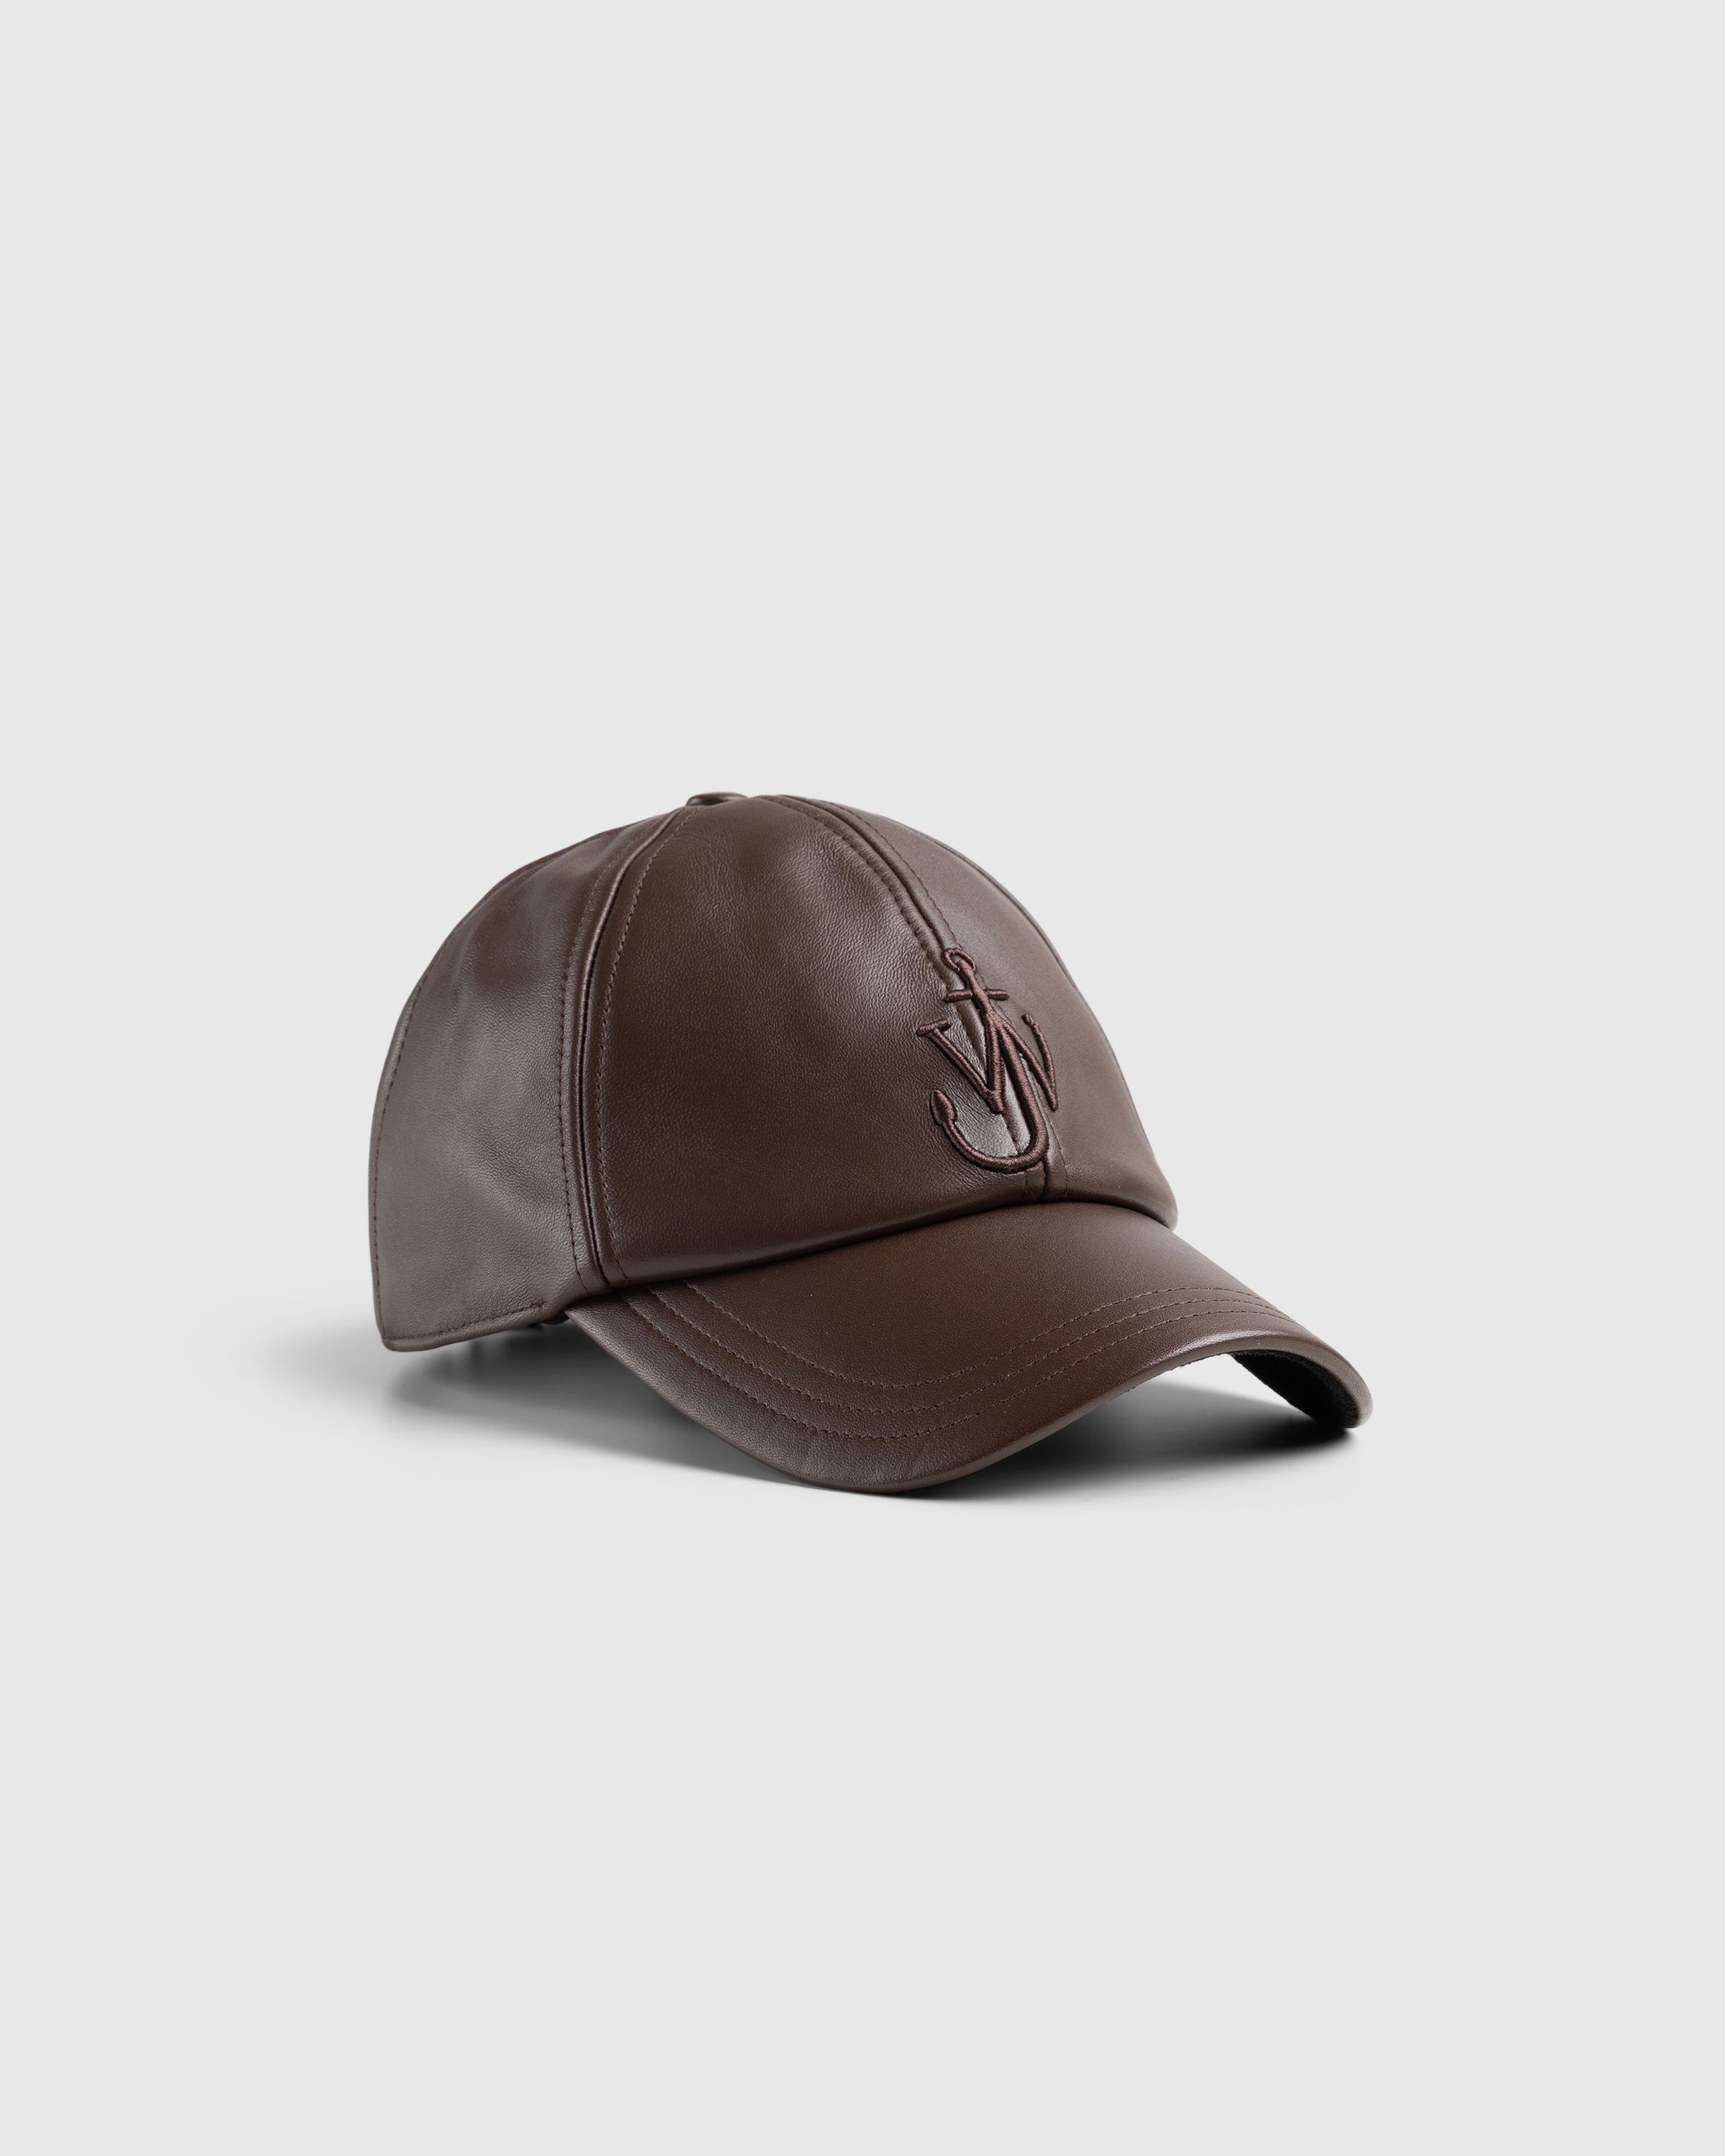 J.W. Anderson - Leather Baseball Cap Brown - Accessories - Brown - Image 1